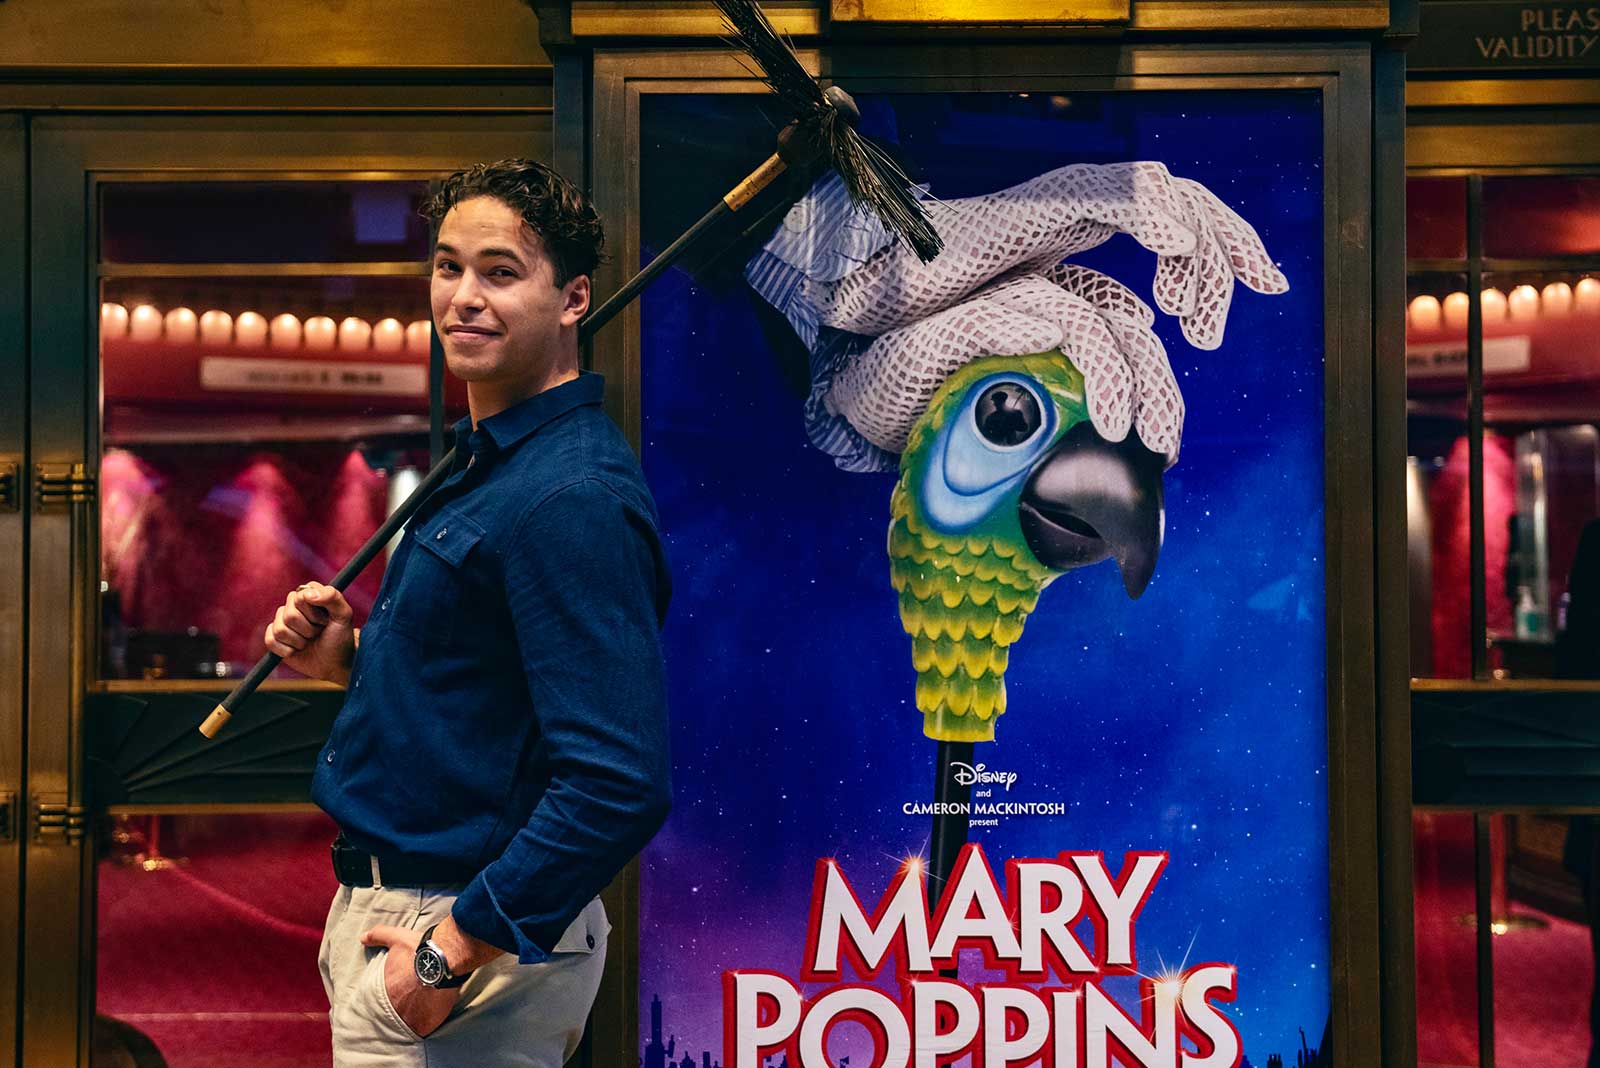 Louis Gaunt to play Bert in Mary Poppins